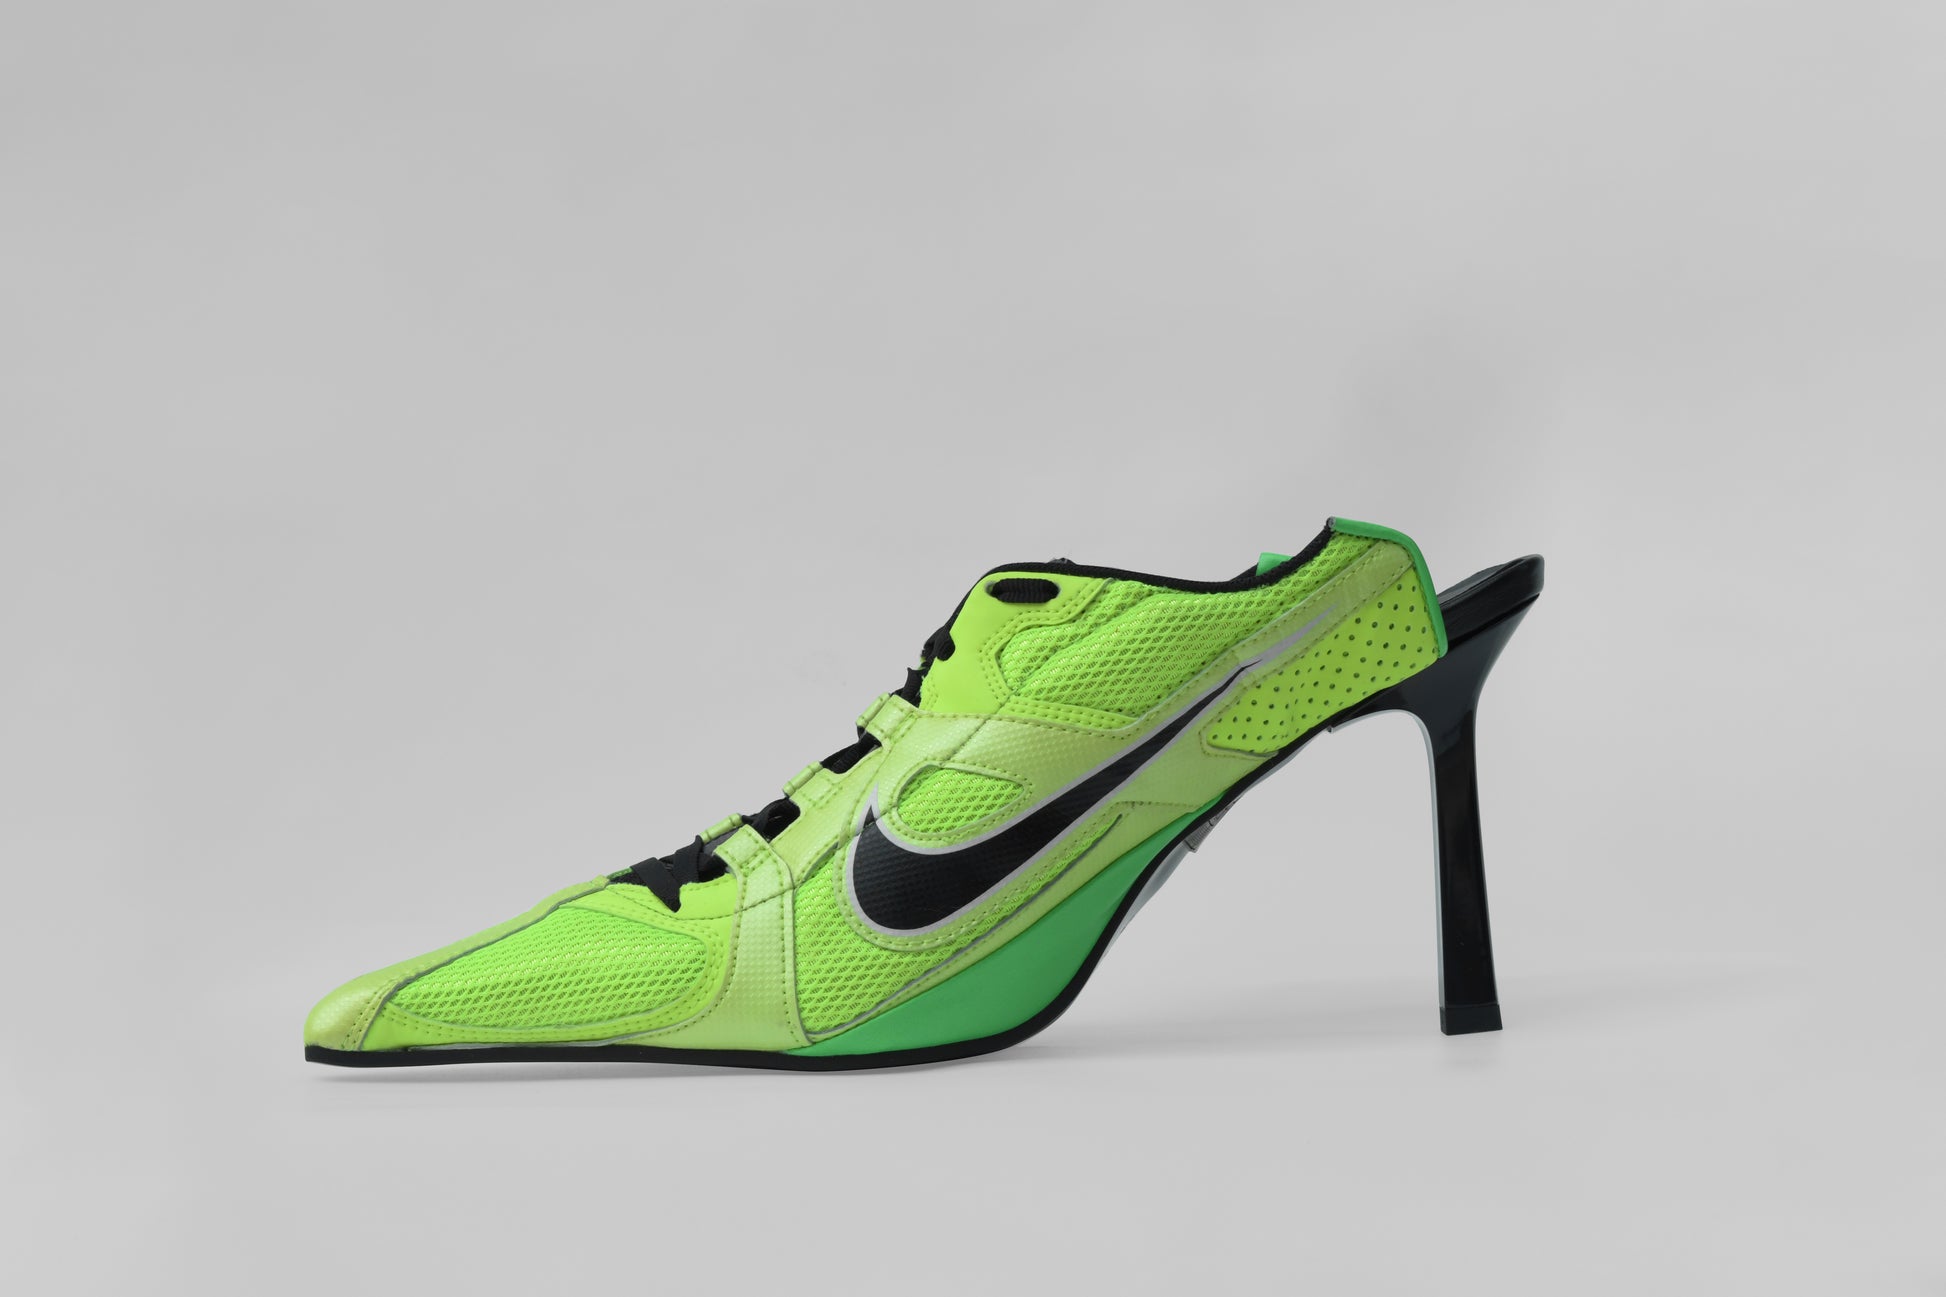 A photograph of the side view of Ancuta Sarca Olympia Heel Green Shoe, GREEN AND BLACK, FRONT LACE-UP FASTENING, POINTED TOE, SLIP-ON STYLE, MADE IN ITALY